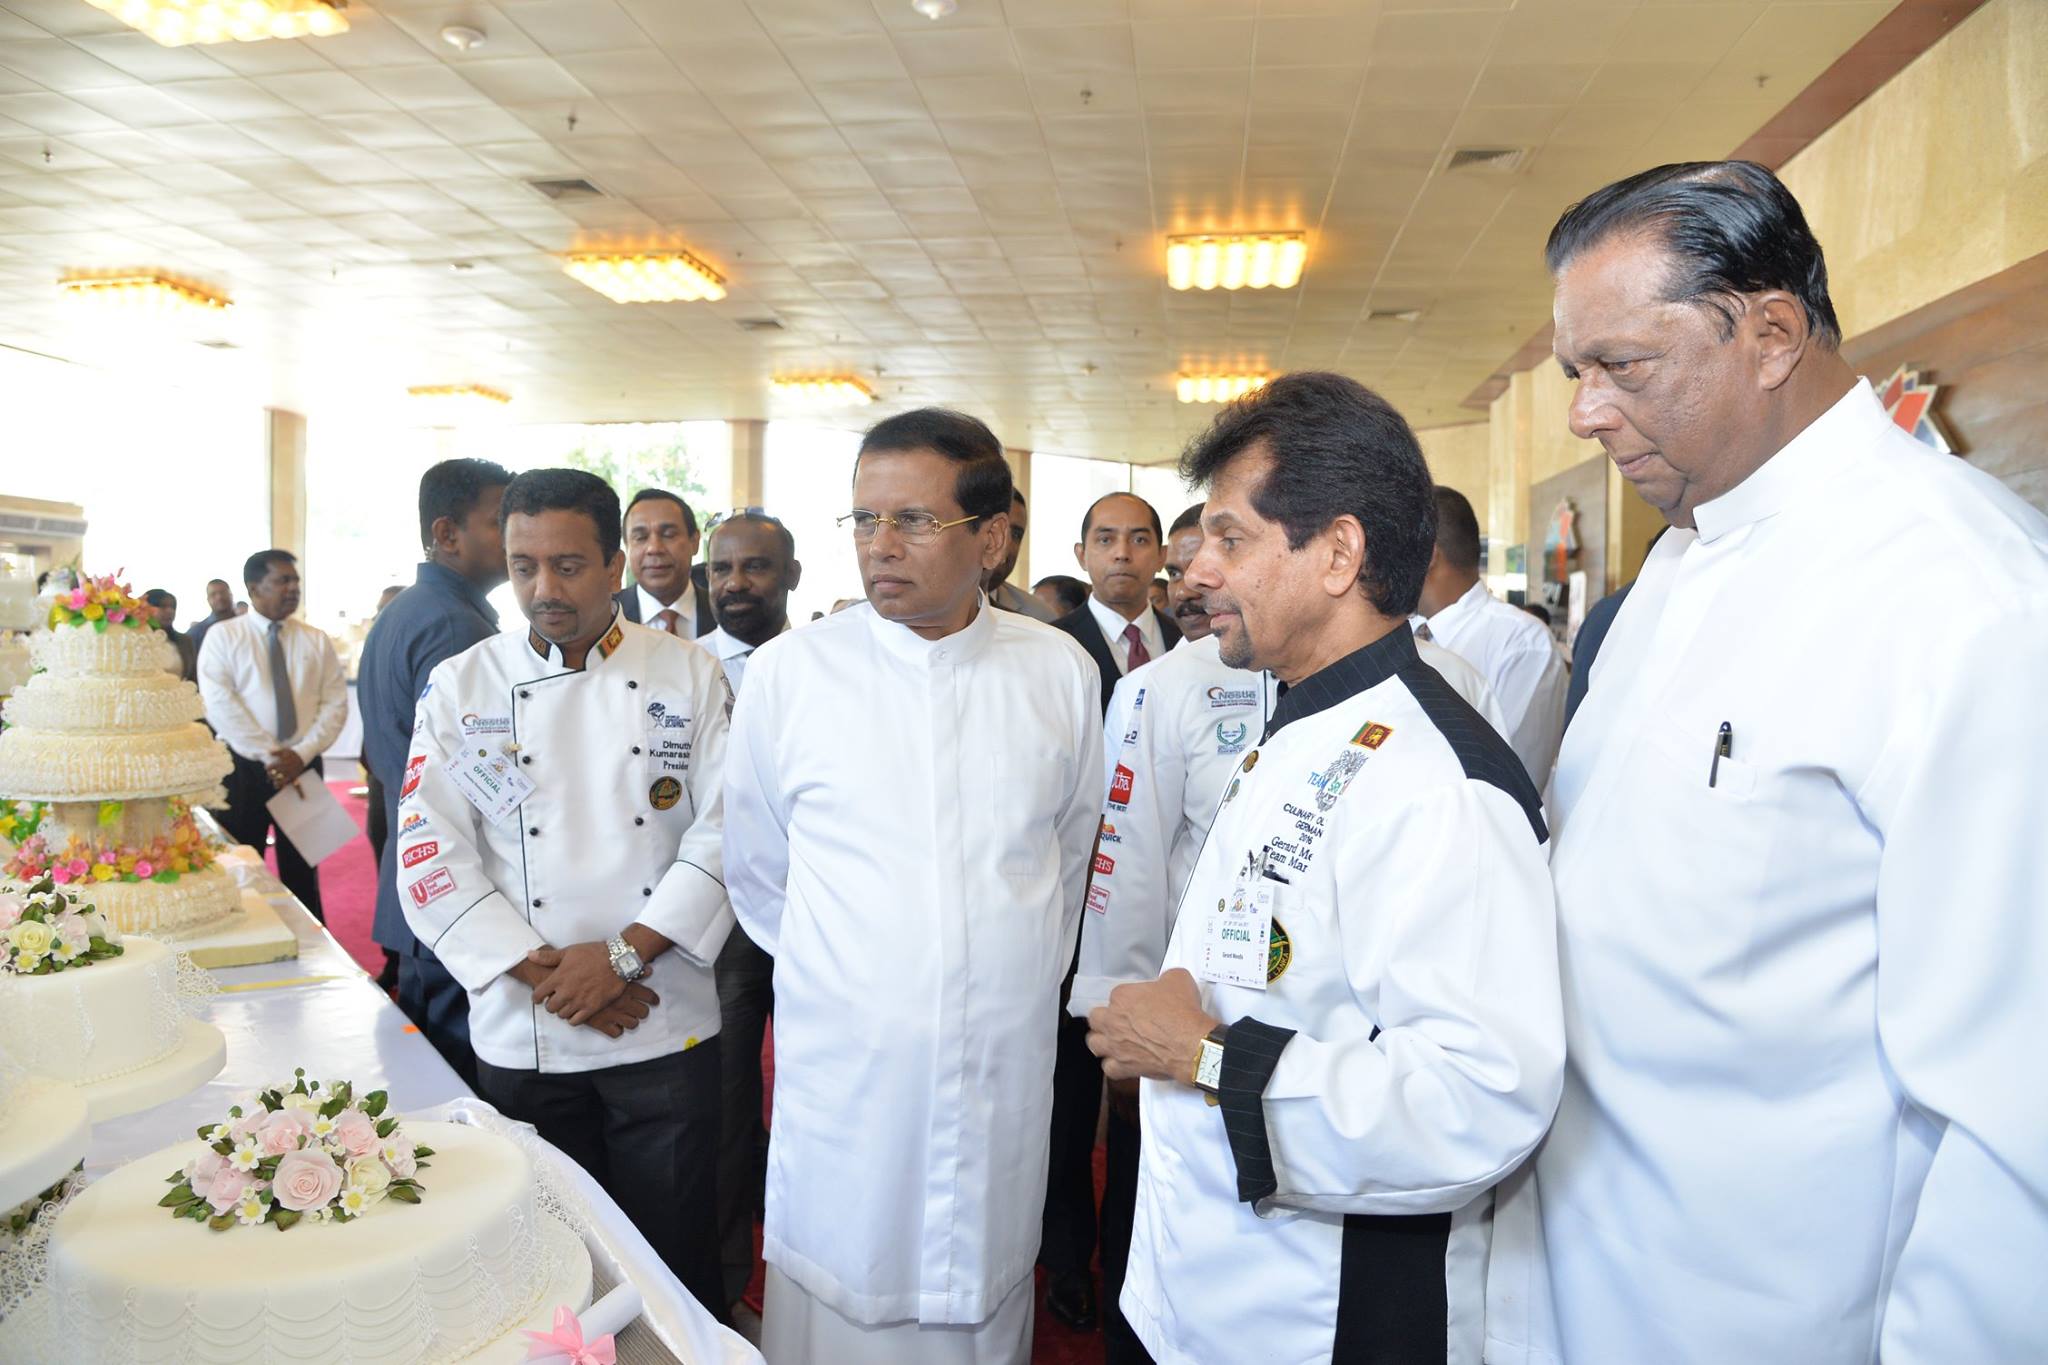 President opens Culinary Art and Food Expo 2017